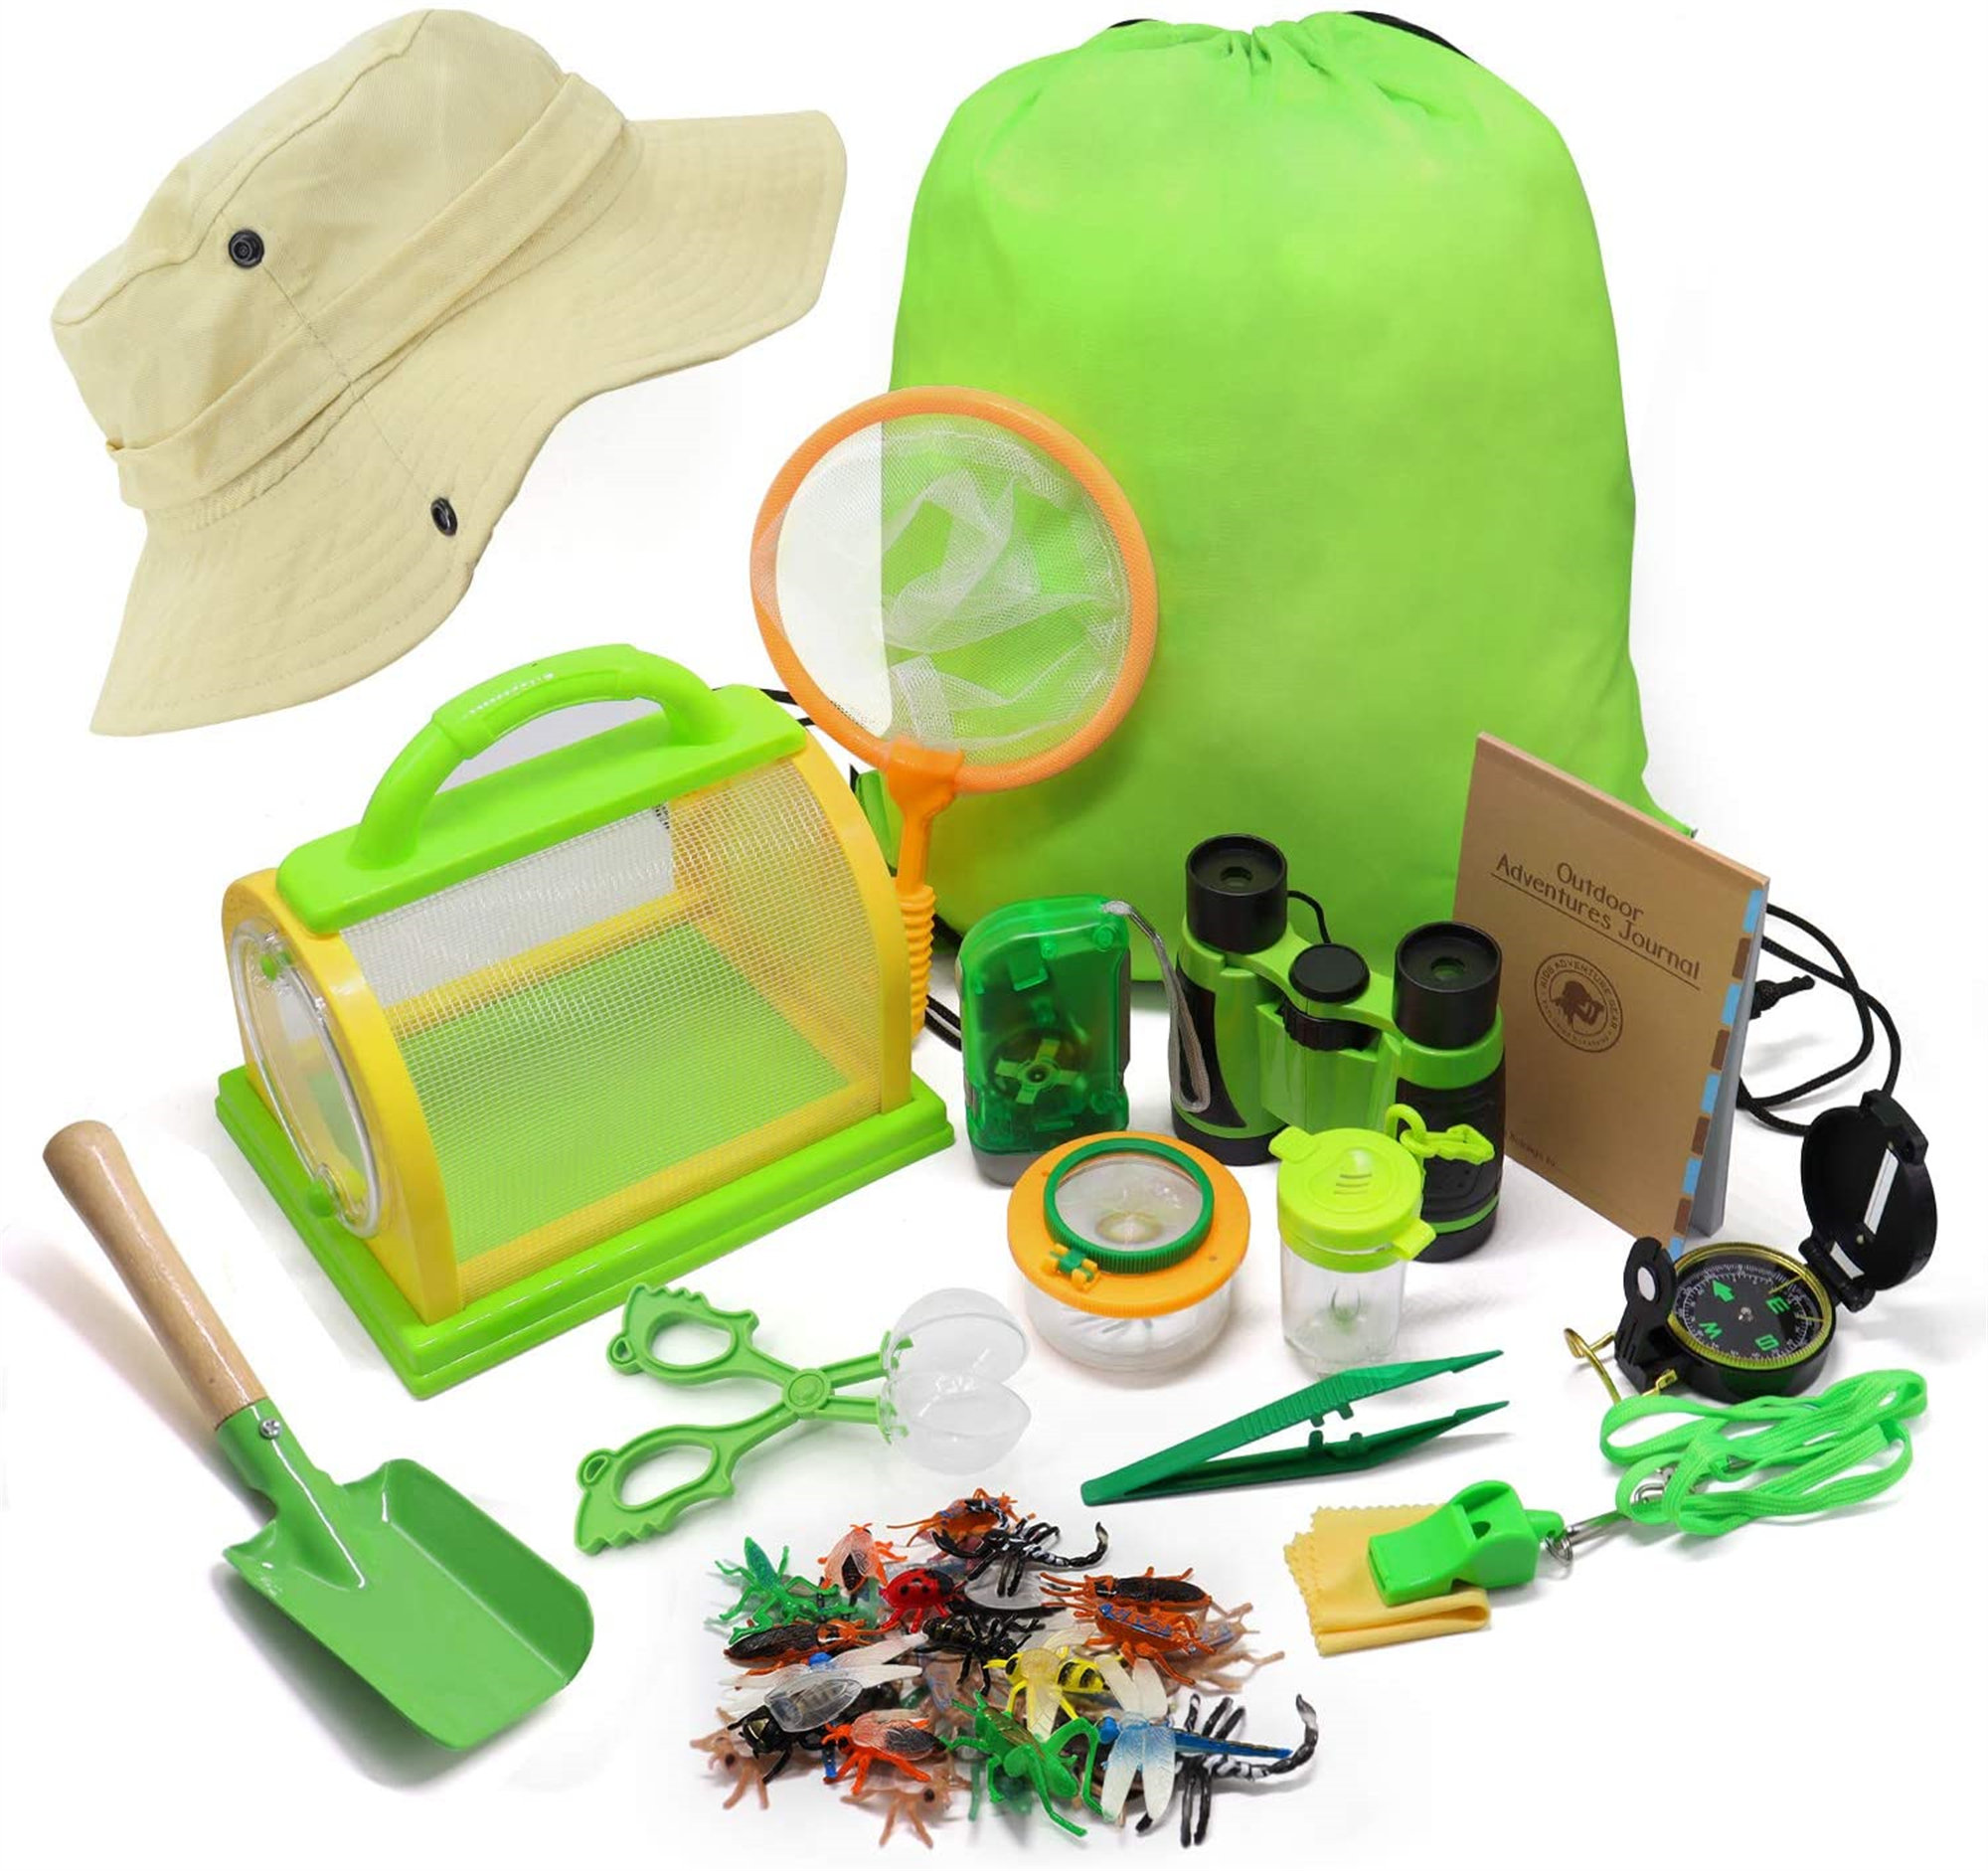 patois Stolthed Kyst ZGONGZ Outdoor Explorer Kit For Kids Nature Exploration Children Adventure  Kit Bug Catching Set Insert Observation Tools With  Flashlight,Binoculars,Compass Educational Toys Camping Hiking (Green) |  Wayfair